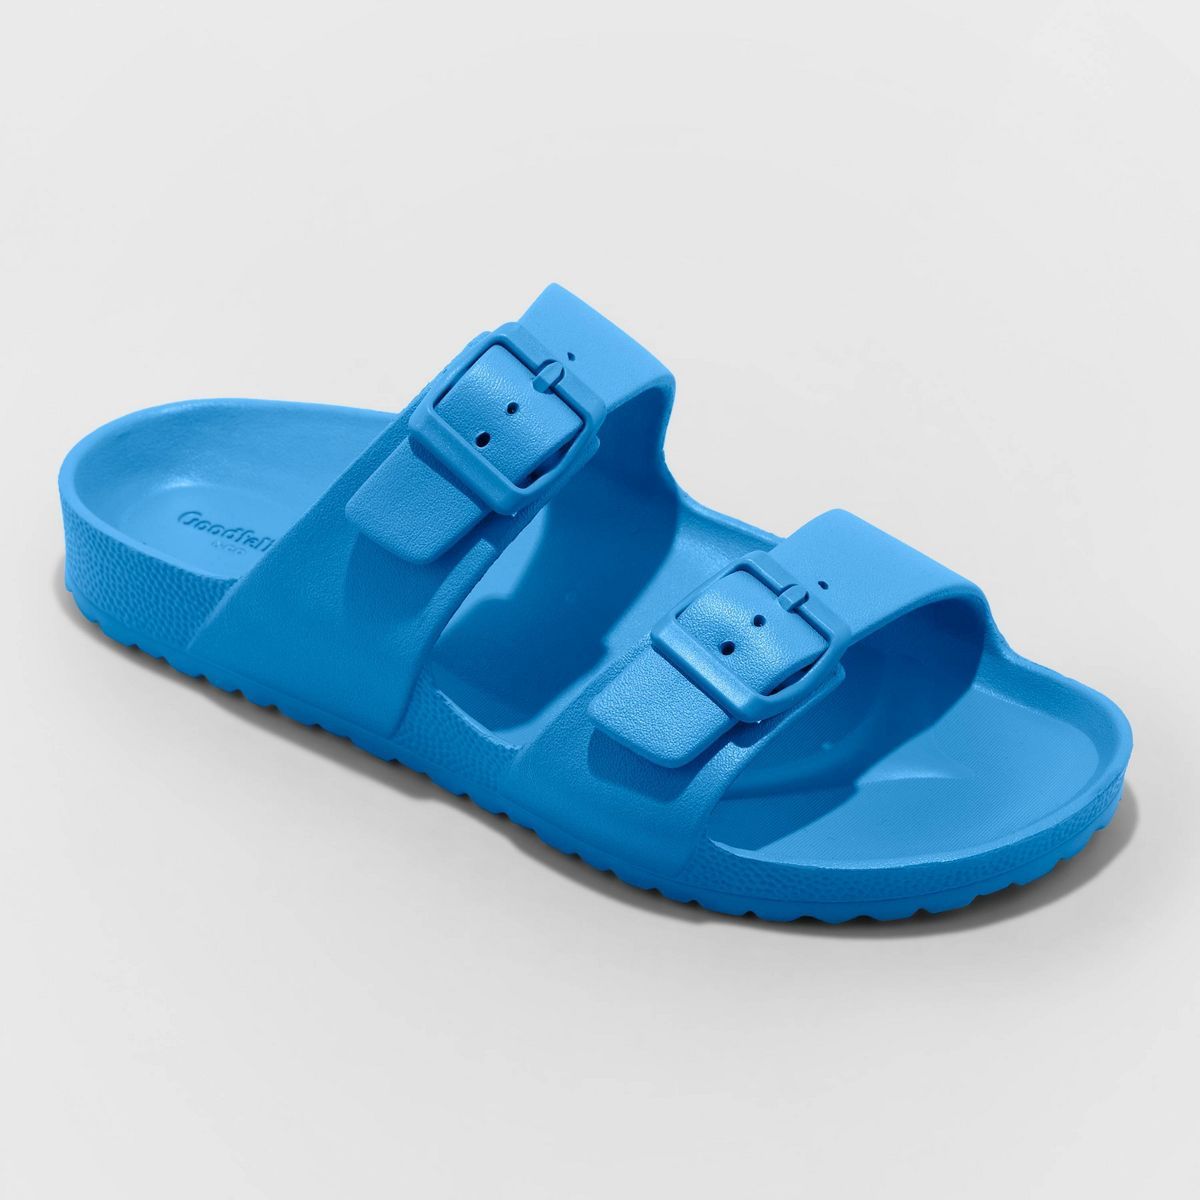 Men's Carson Two Band Slide Sandals - Goodfellow & Co™ | Target